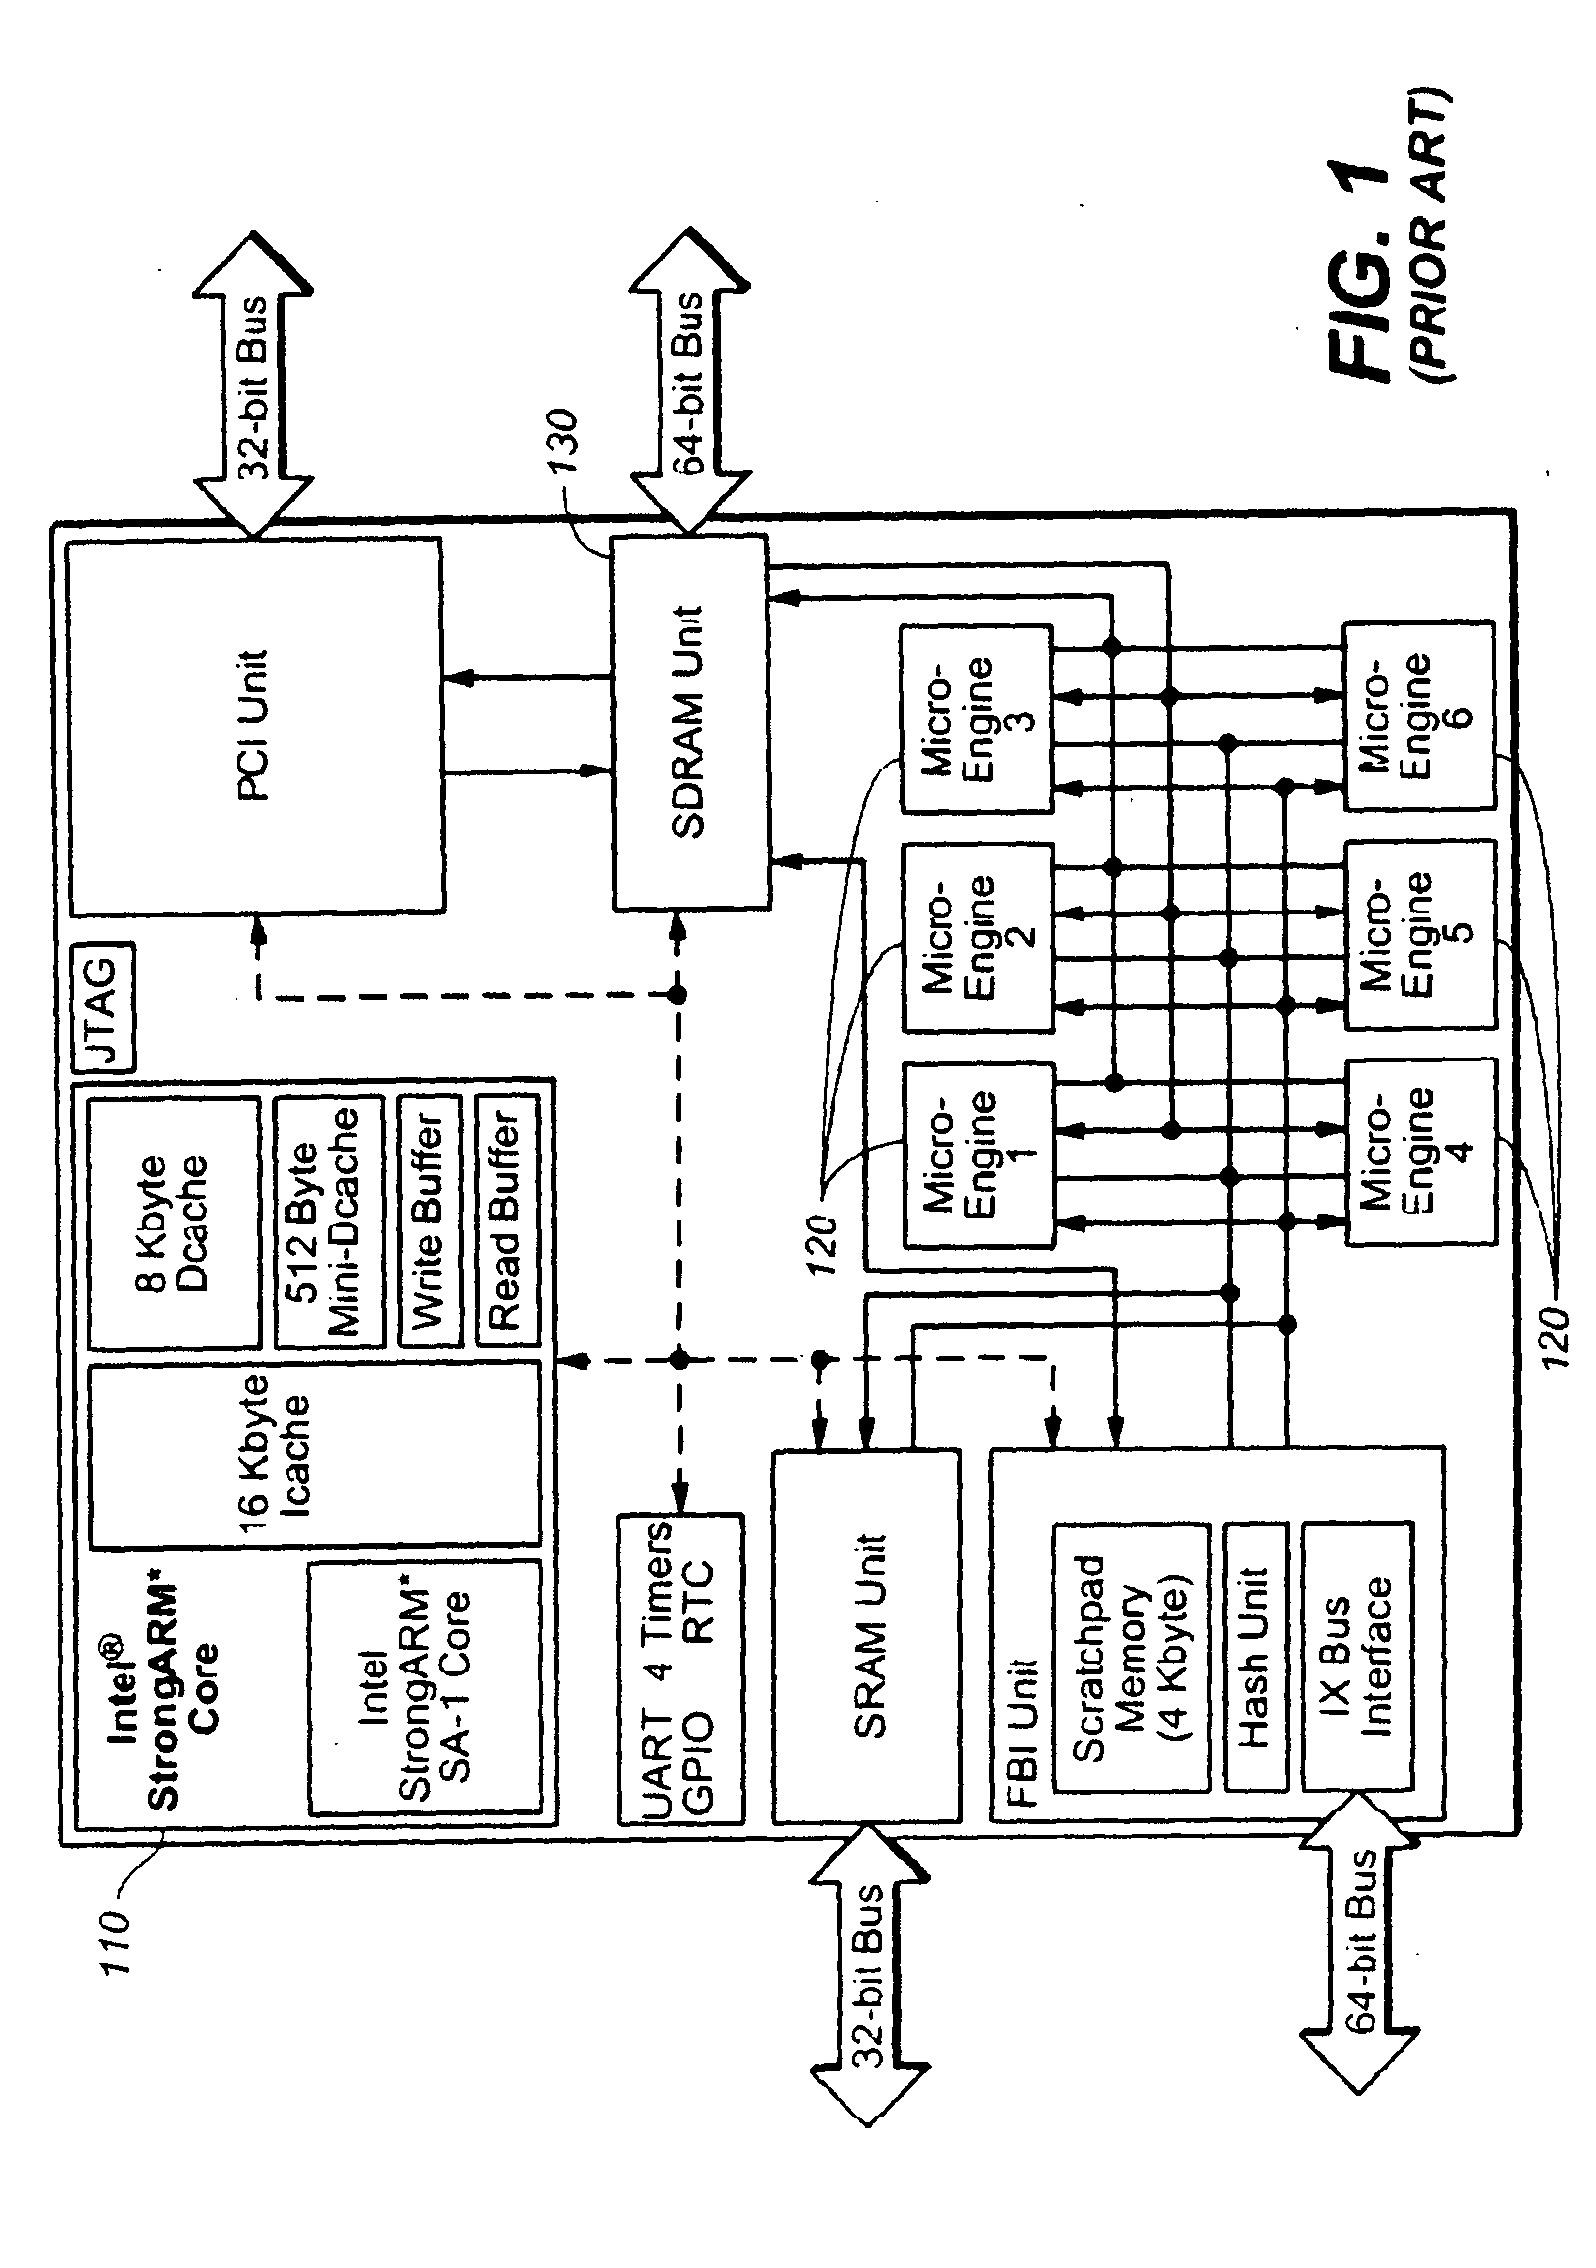 System and method for large microcoded programs